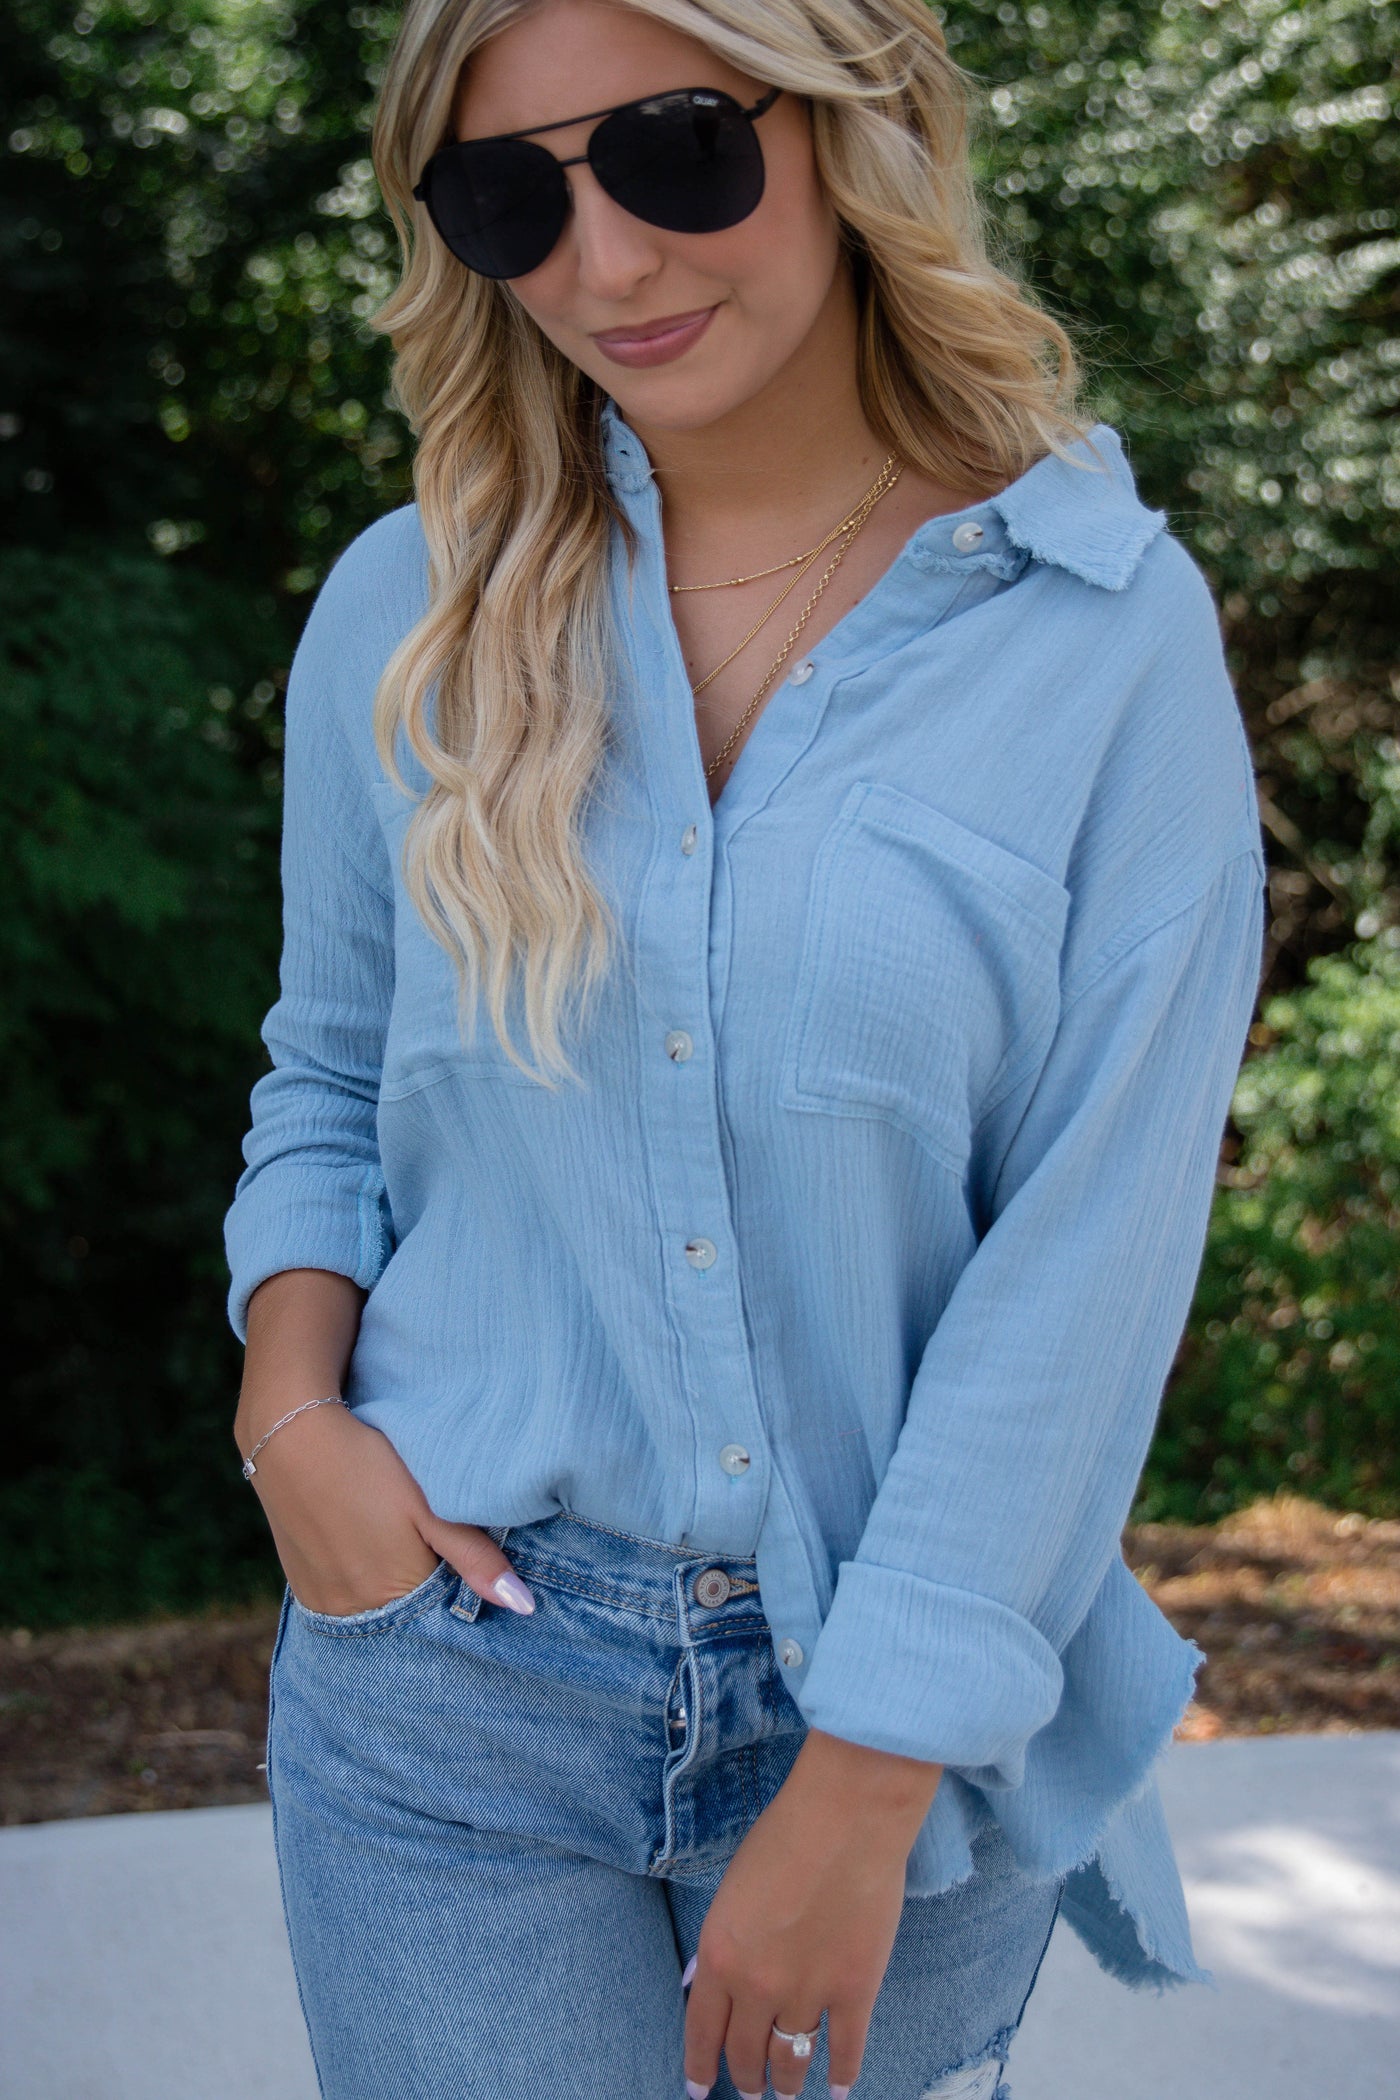 Women's Blue Button Down- Cotton Button Down Top- Casual Top With Pockets